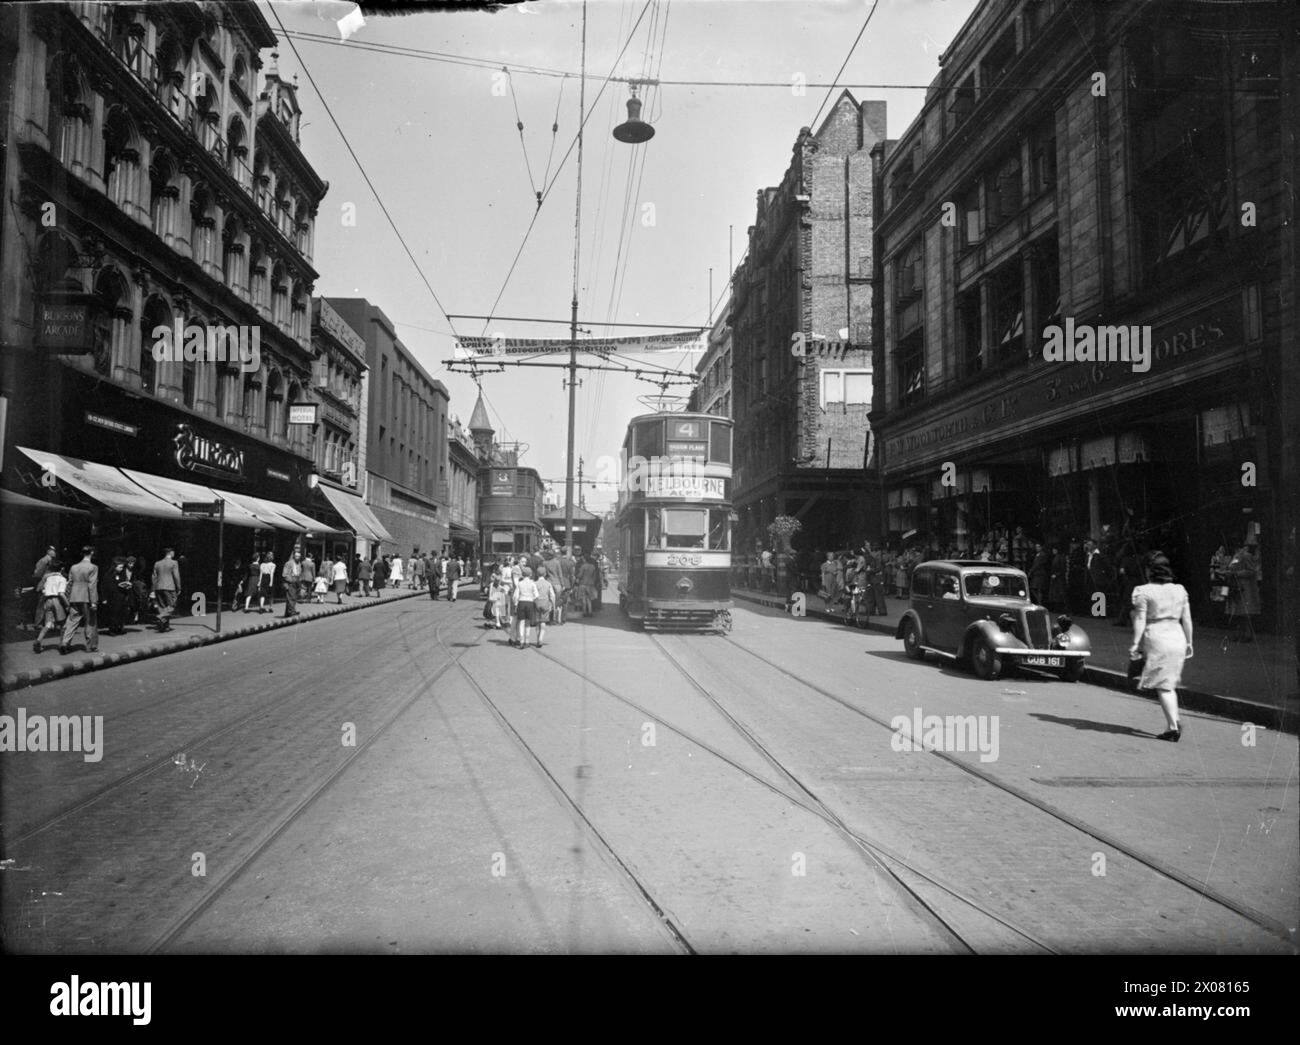 A MIDDLE EAST SOLDIER REVISITS BRITAIN: LIFE IN WARTIME LEEDS, ENGLAND, UK, 1943 - Civilians go about their daily business in a busy scene looking down Briggate in Leeds. On the left hand side, Burton's can be seen alongside the Imperial Hotel. The number 3 tram can also be seen travelling away from the camera, whilst on the right hand side, the number 4 tram is travelling towards the camera on its way to Haddon Place via Roundhay Road. An advertisement for Melbourne Ales is clearly visible on the front of the tram. A banner can just be seen, stretching across the road above the trams, adverti Stock Photo